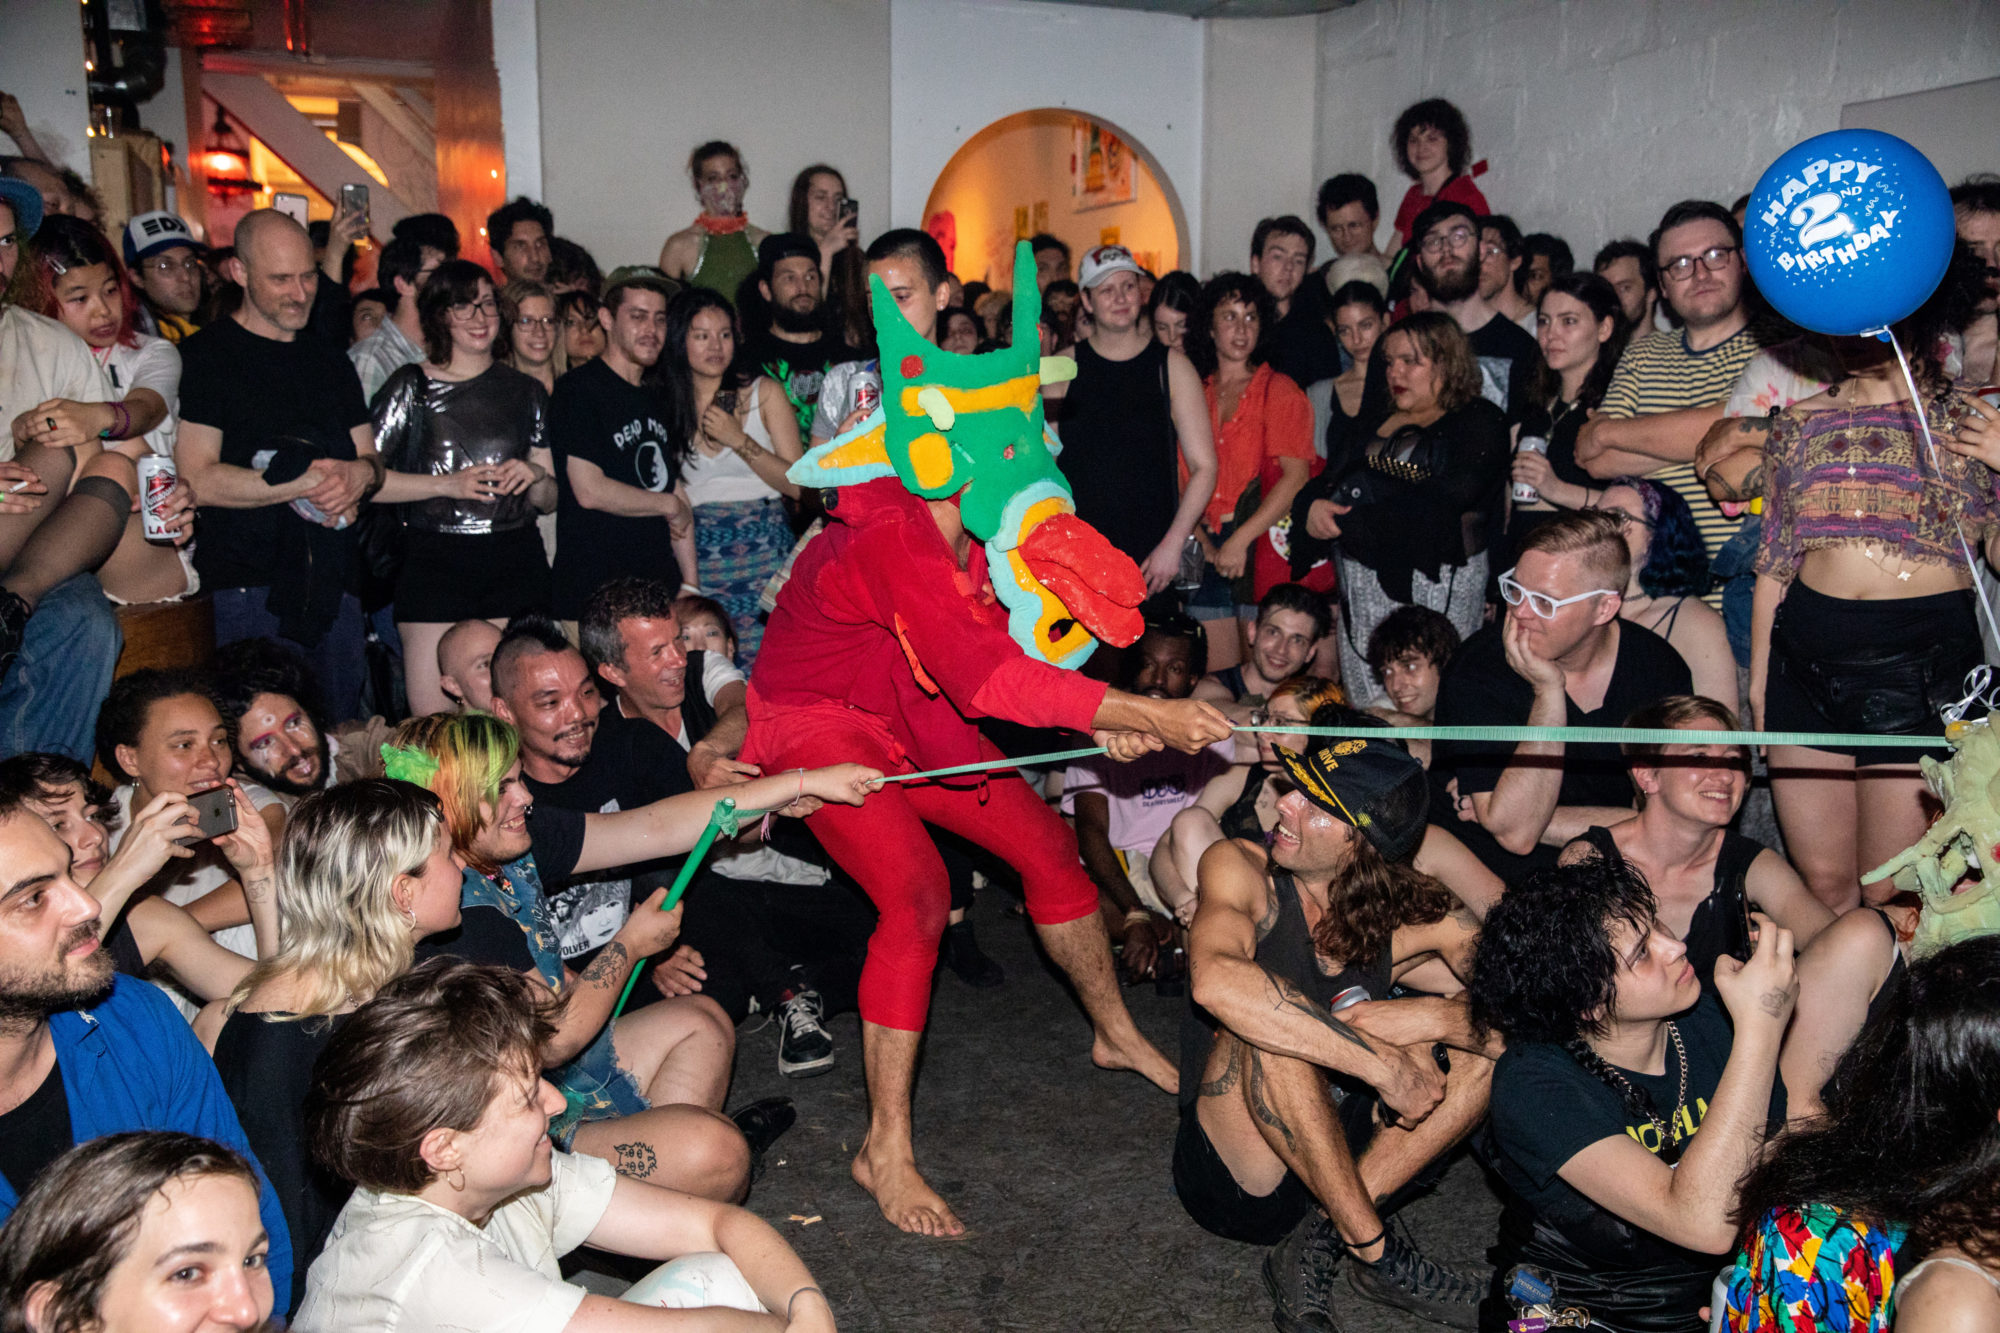 person in red clothing and a dragon mask pulls string in crowd of people